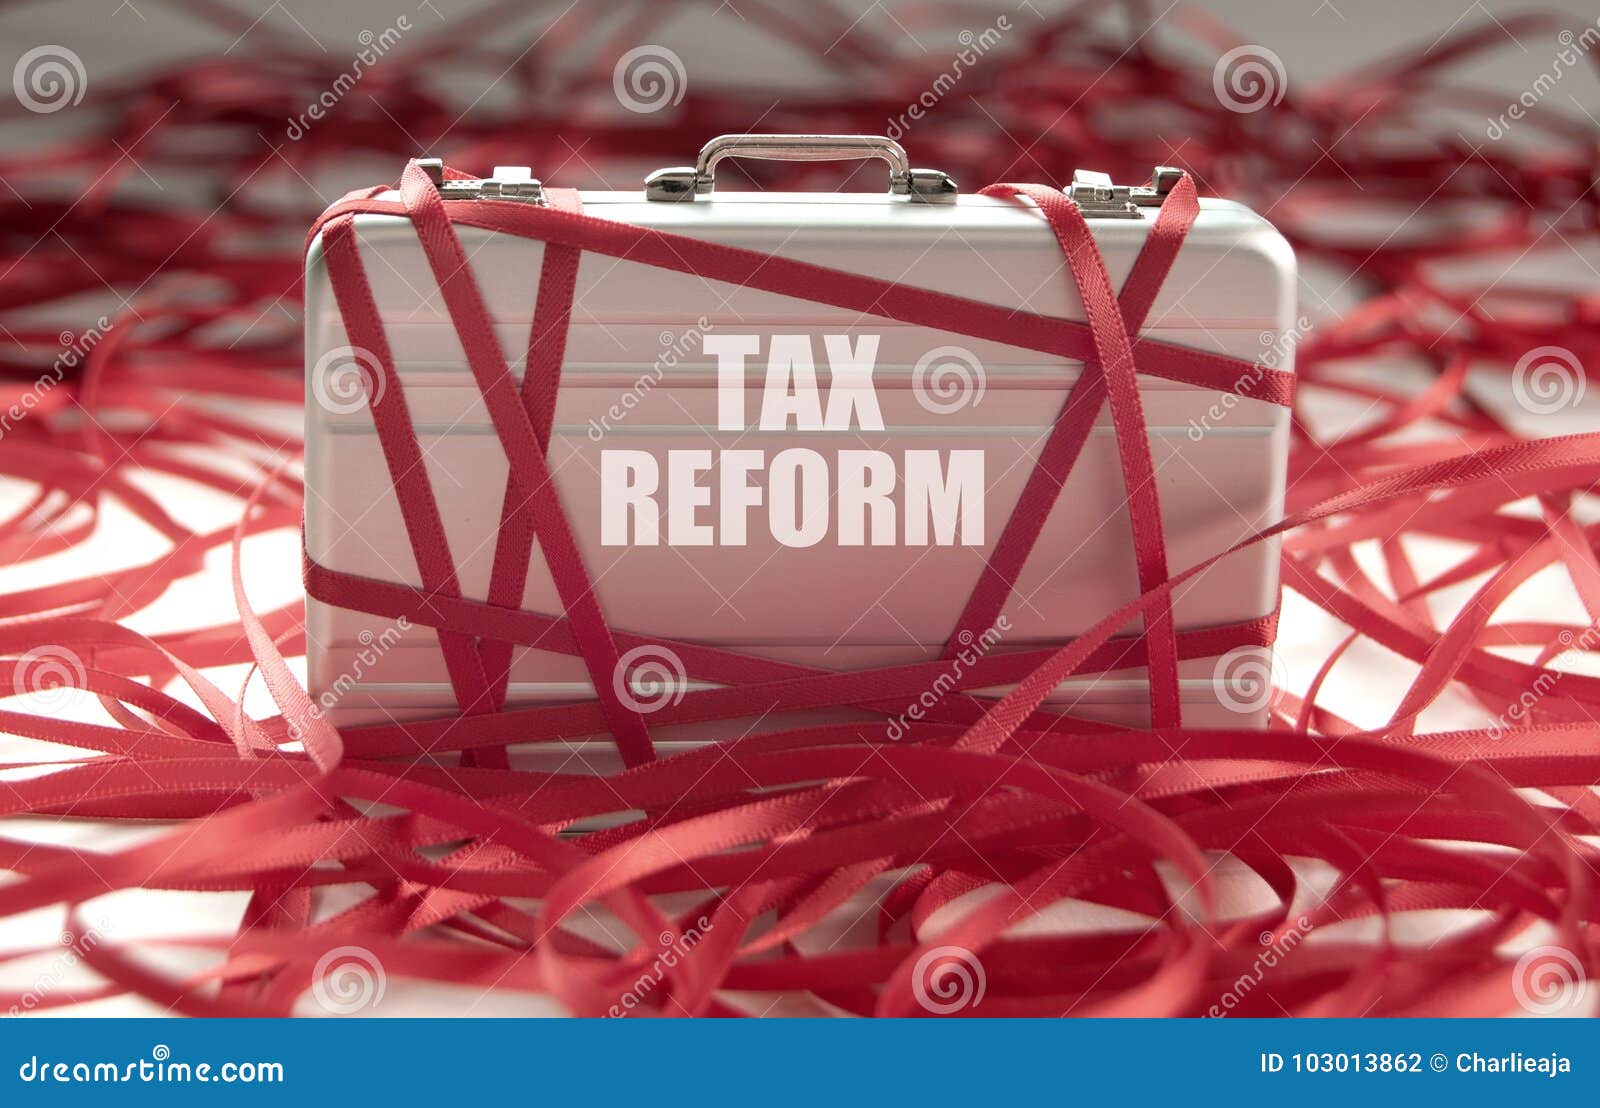 tax reform red tape